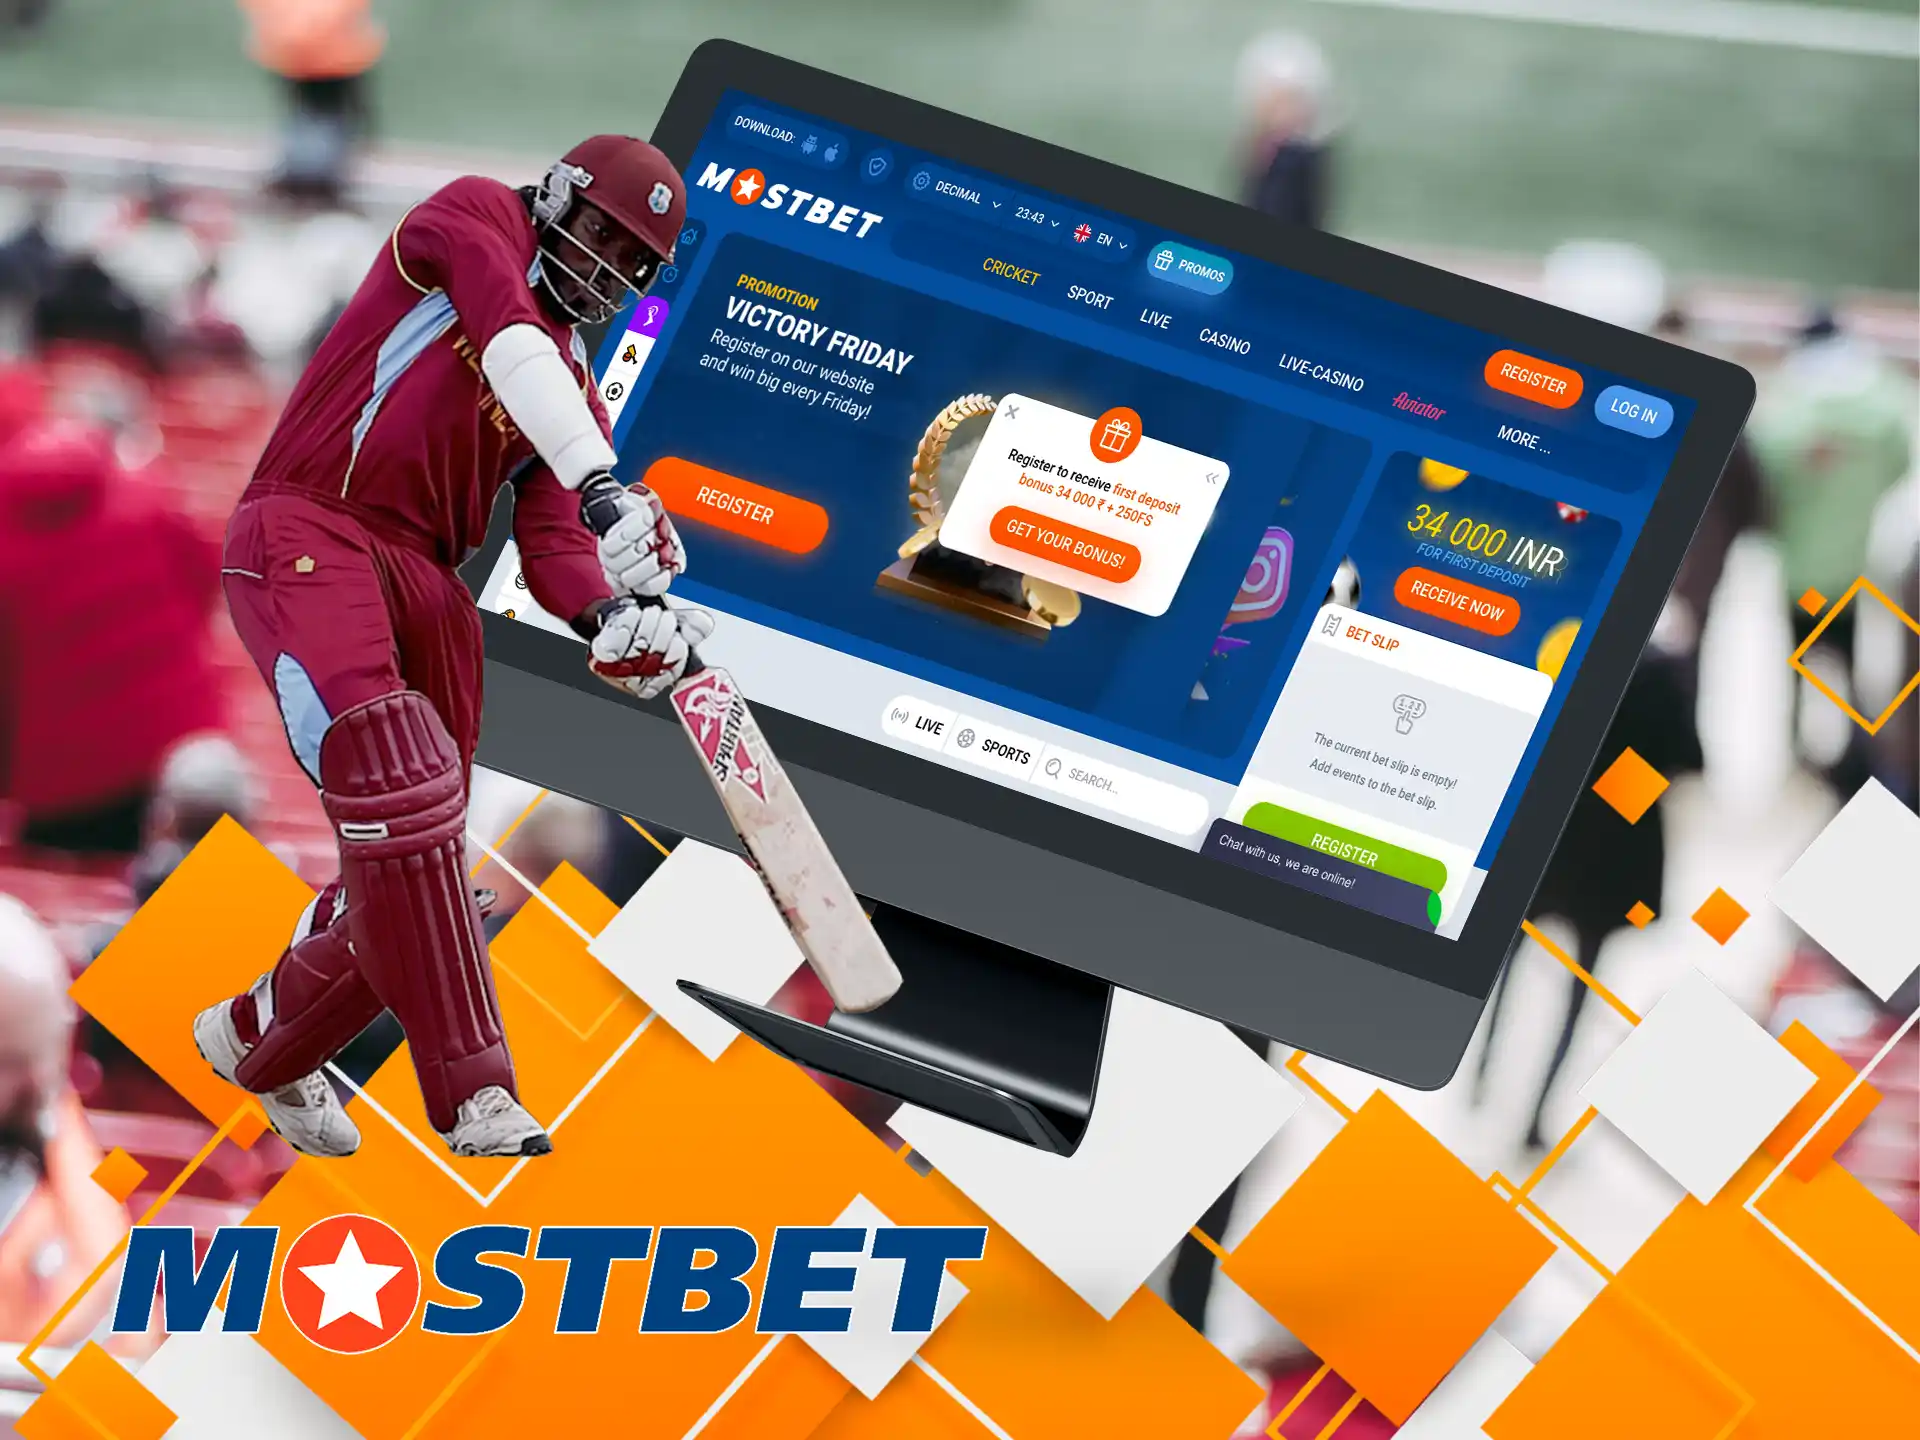 Every day you'll get about competitions including cricket, casino games and more waiting for you in the app and on the Mostbet website.